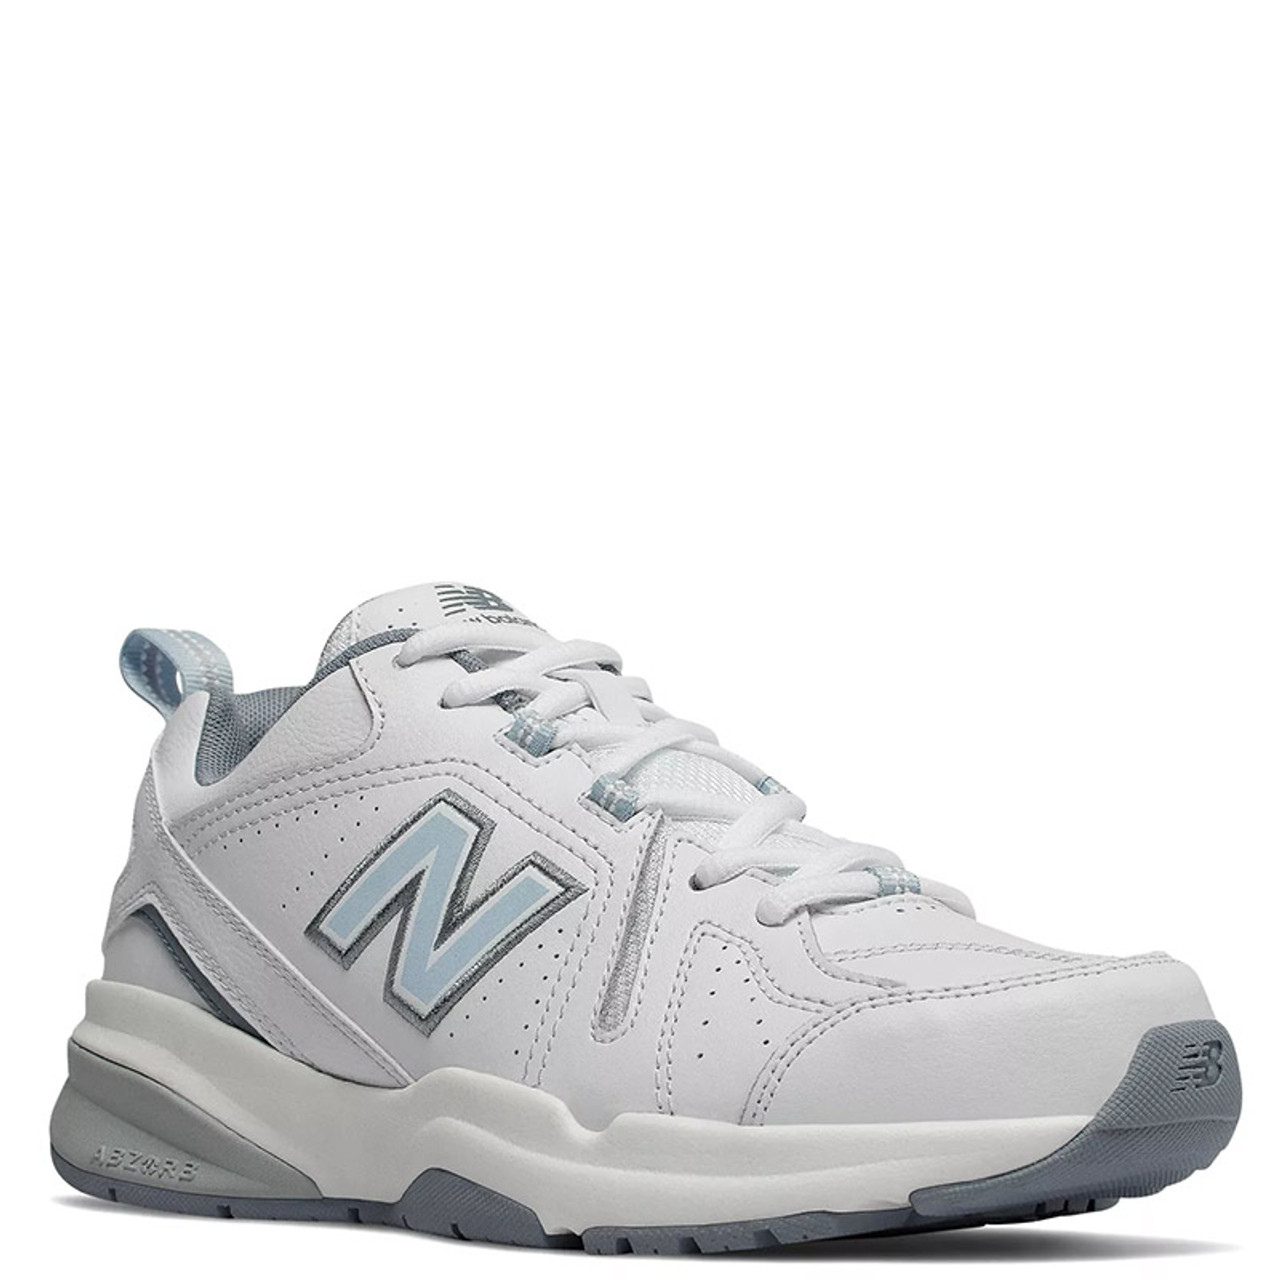 New Balance 608v5 Women's Classic White Leather Trainers with Light ...